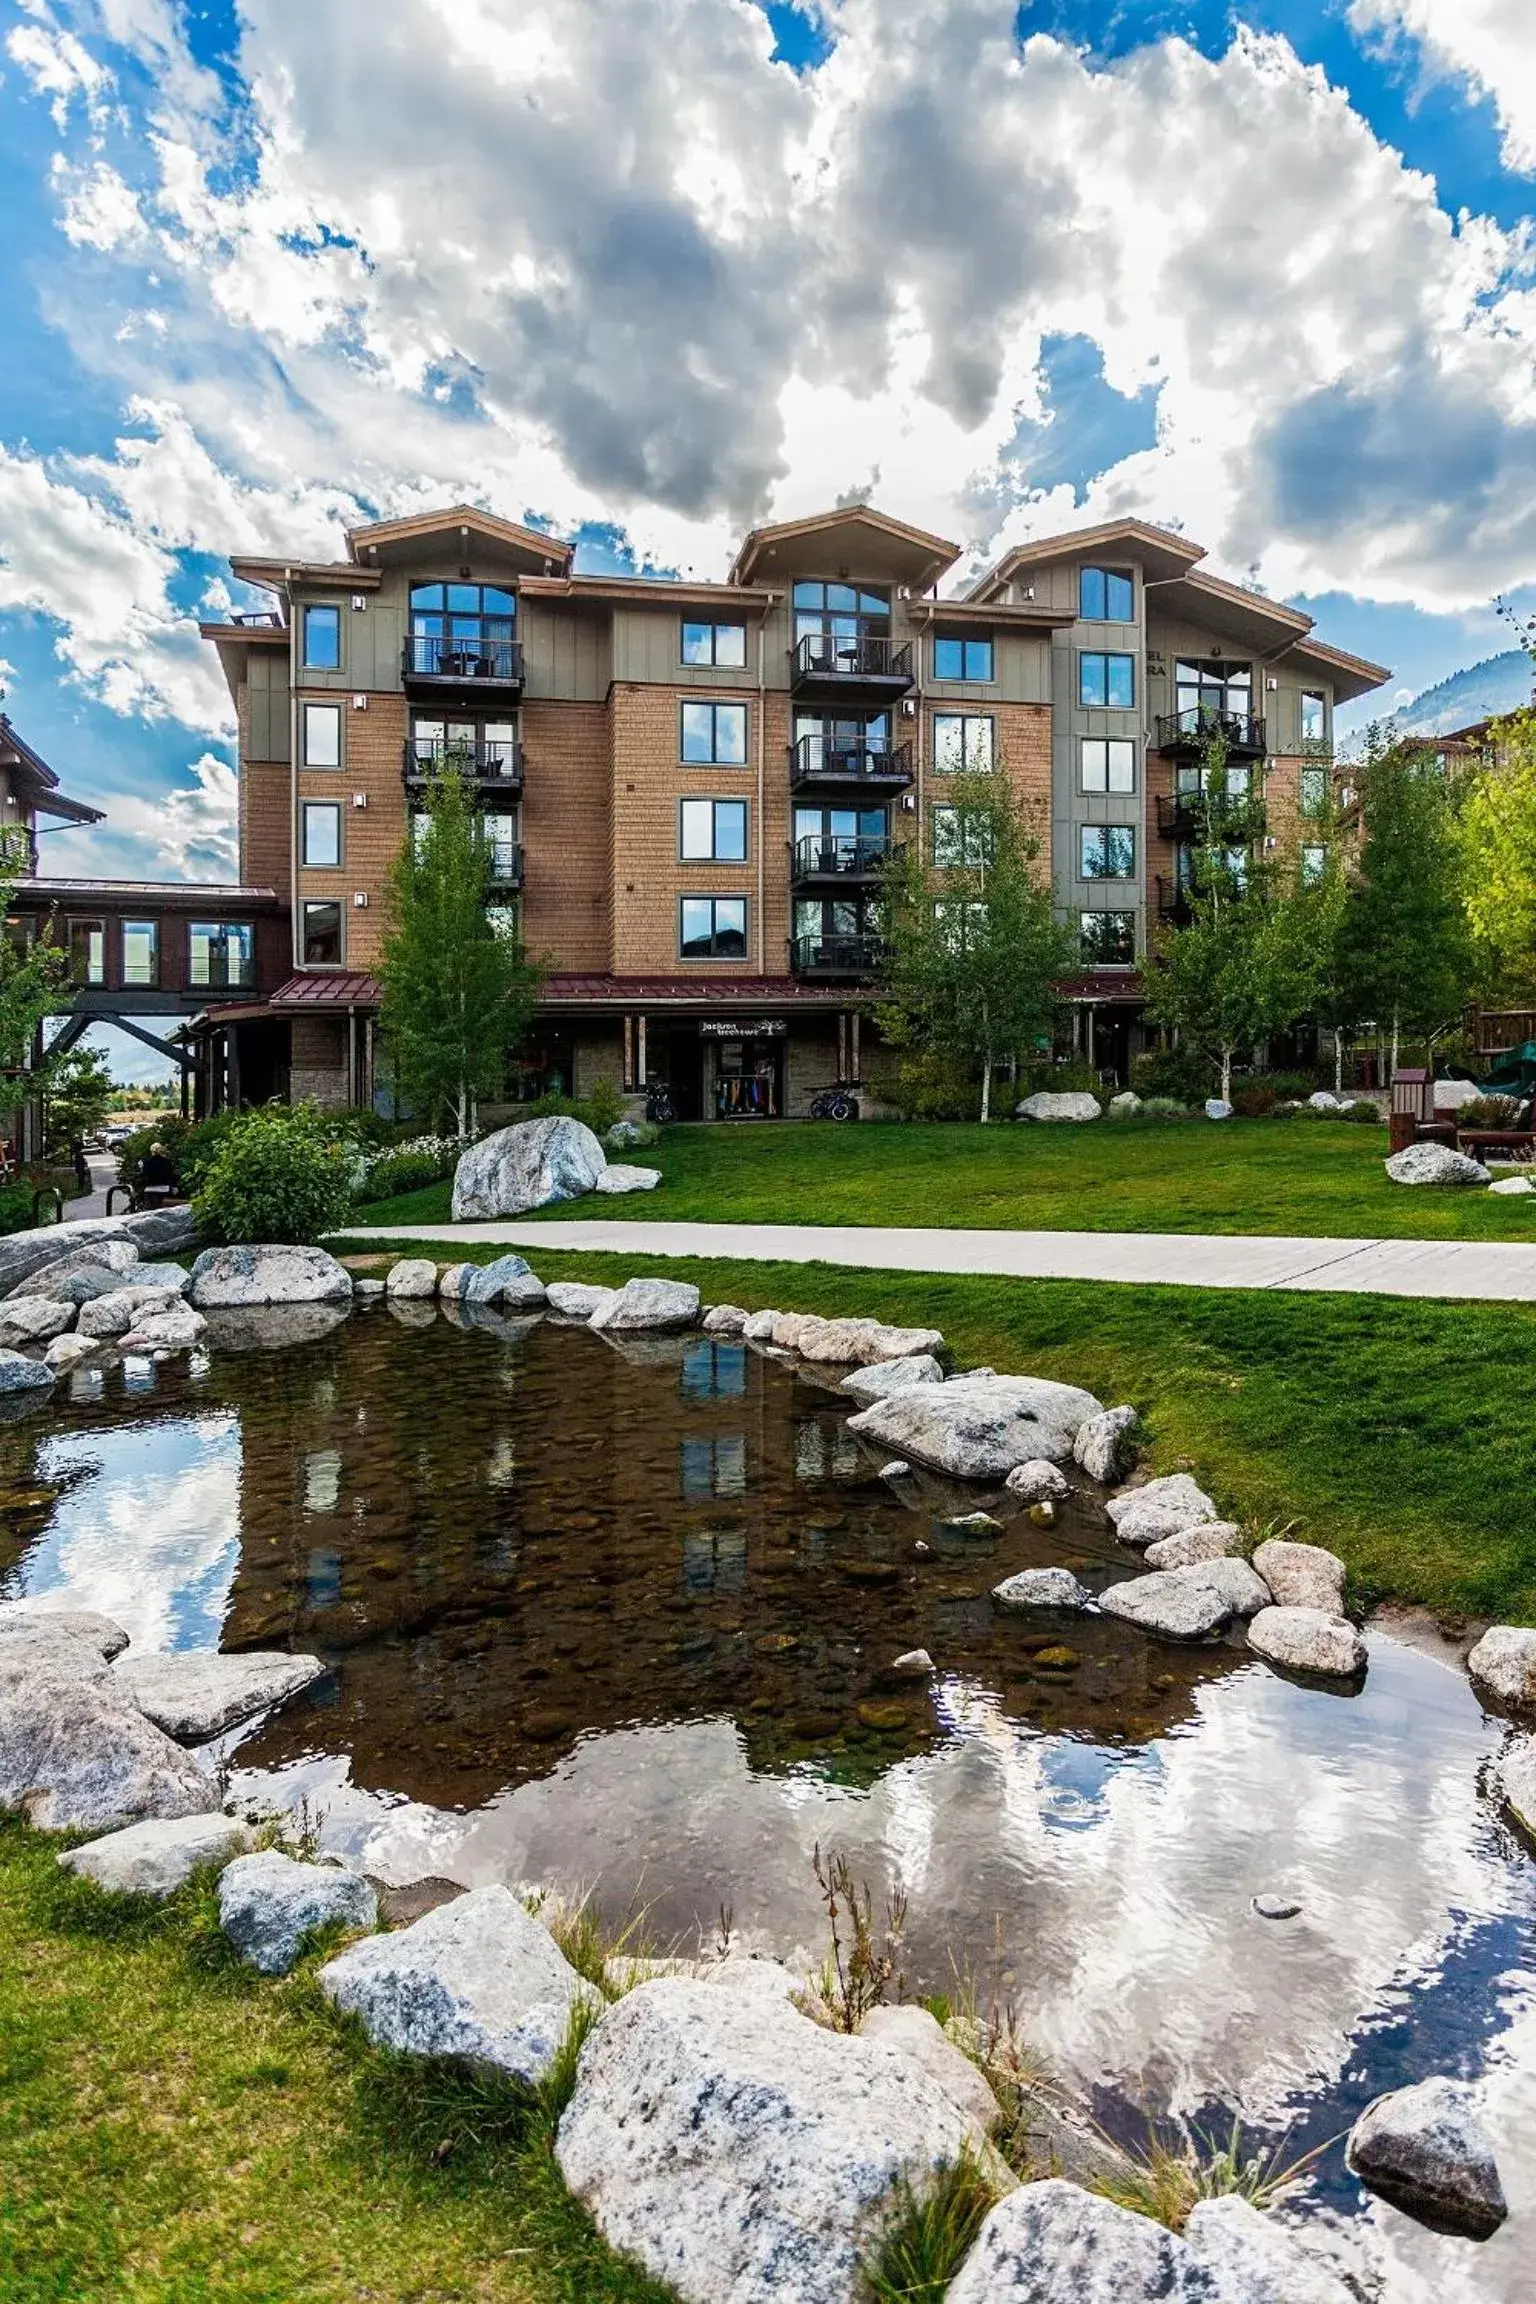 Property Building in Hotel Terra Jackson Hole, a Noble House Resort